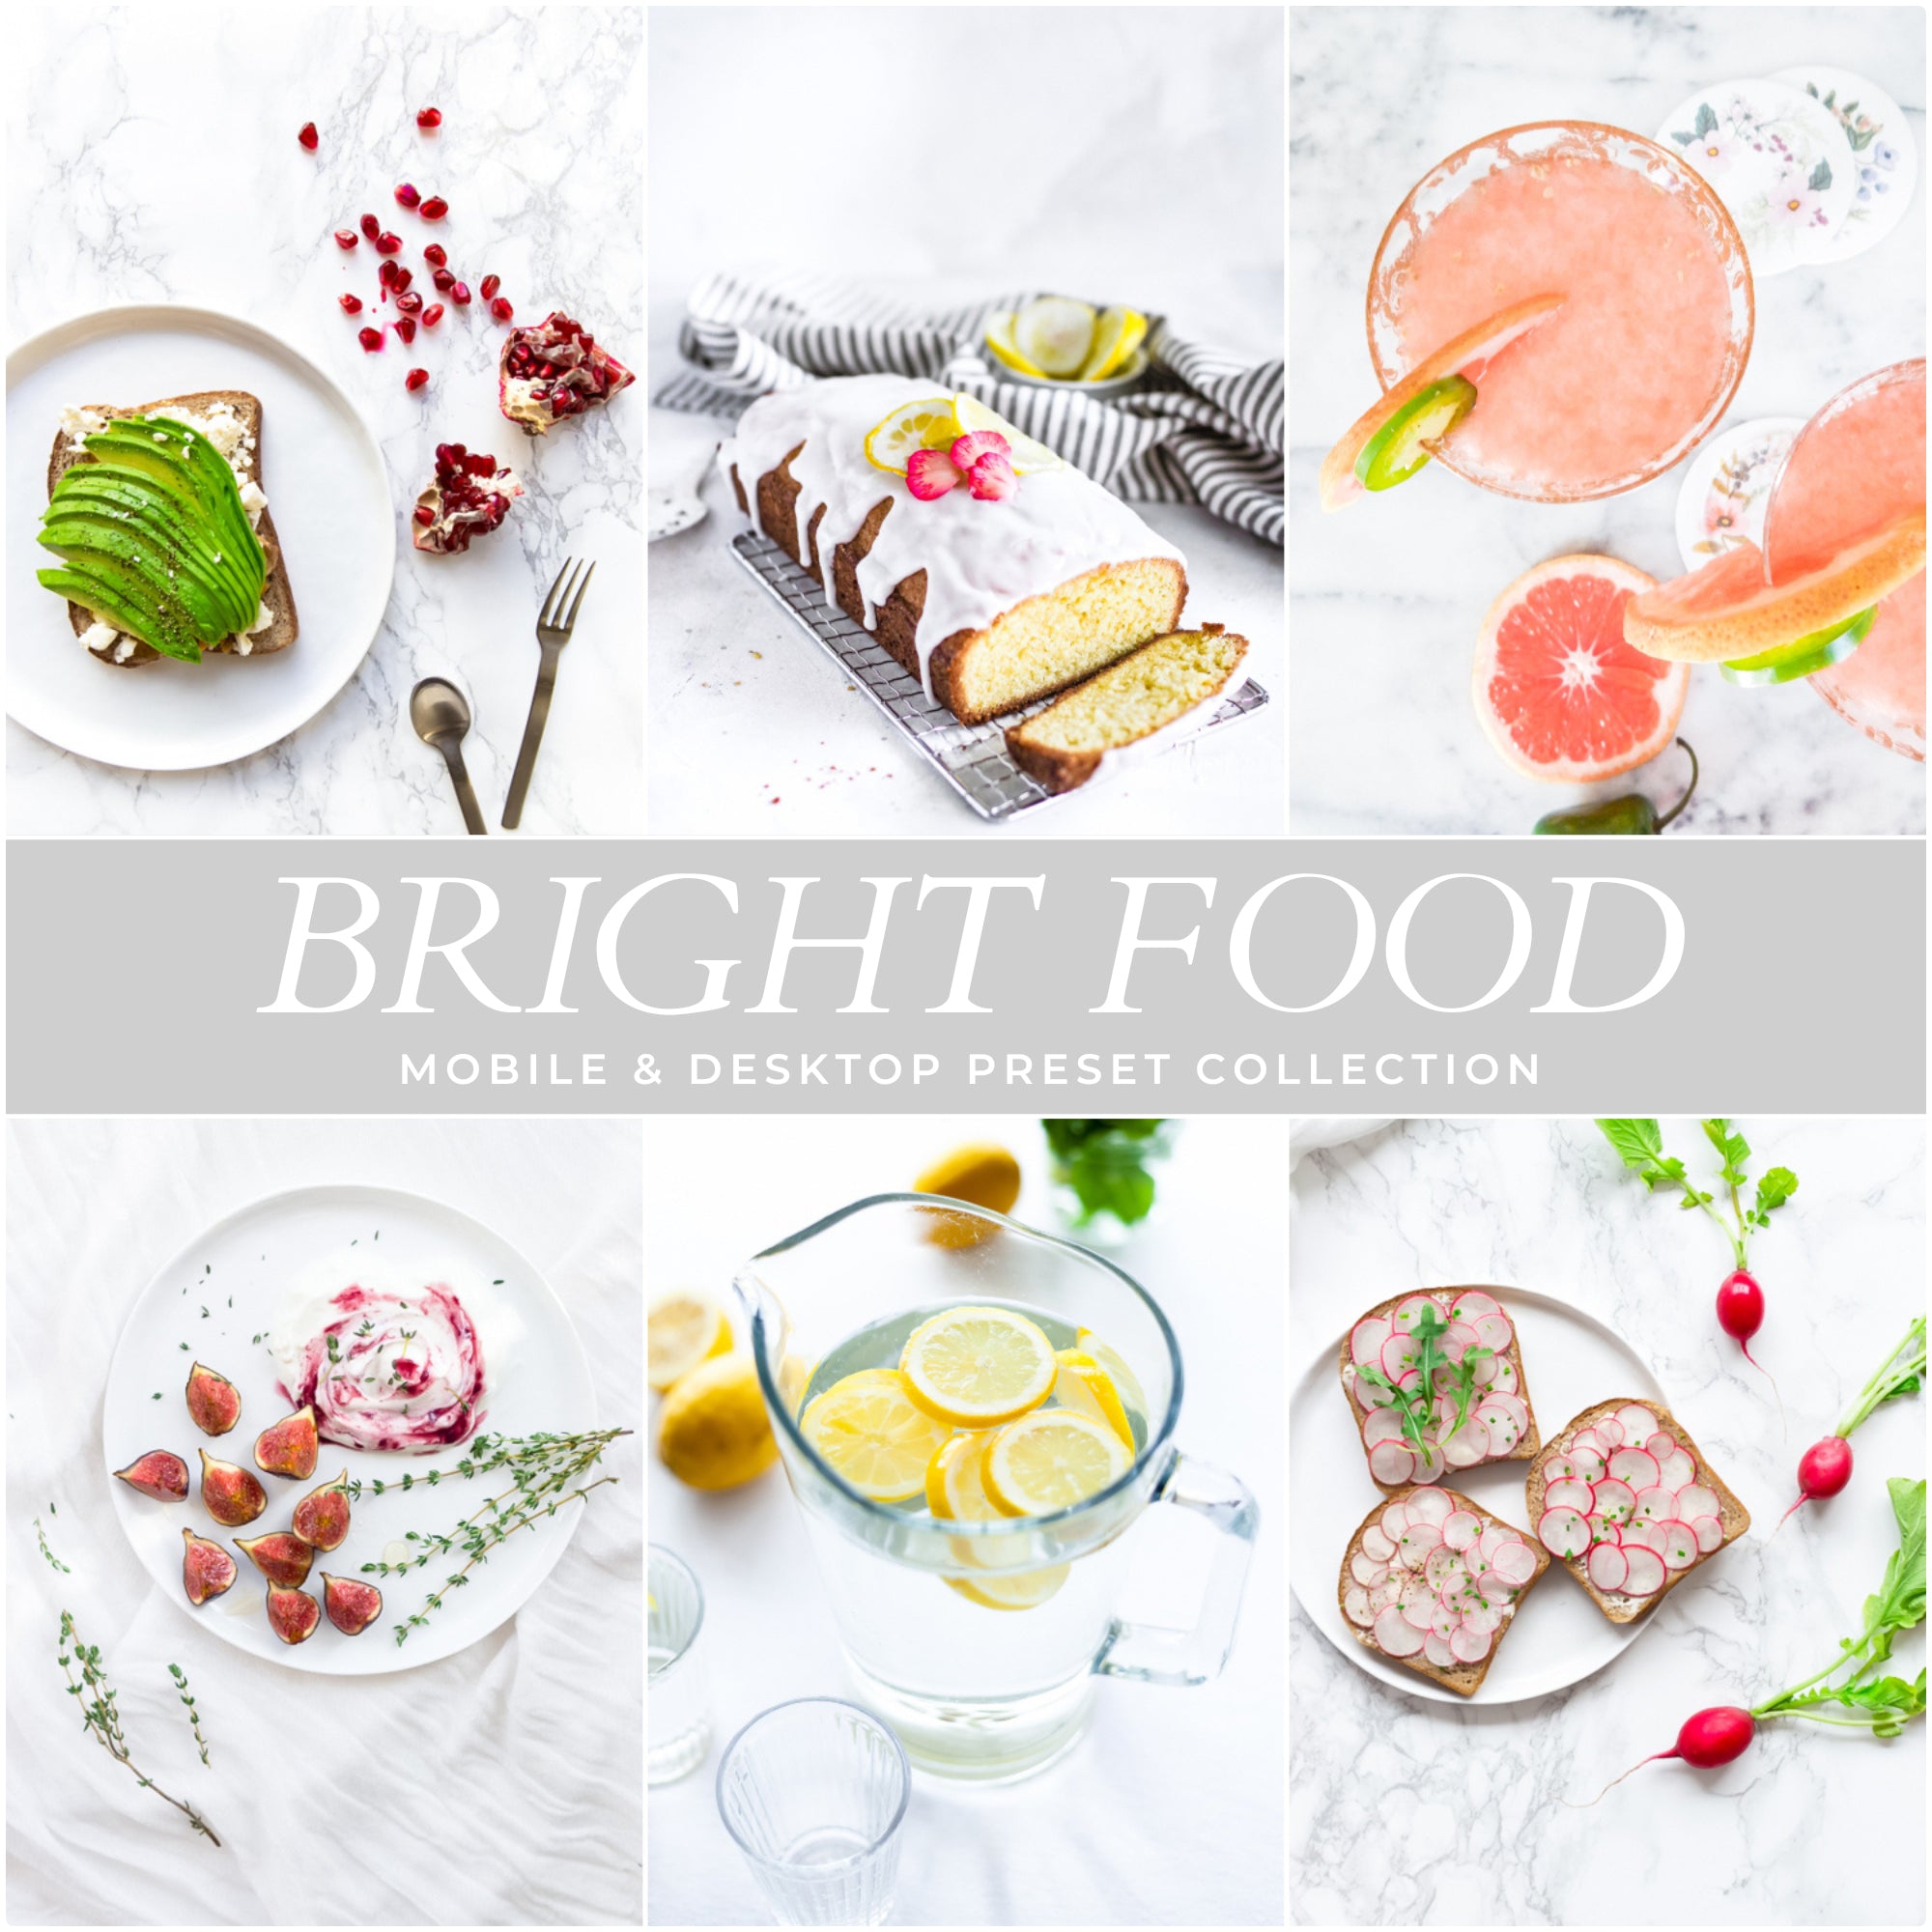 Food Photography Lightroom Presets The Best Instagram Influencer and Blogger Presets by Lou And marks Presets